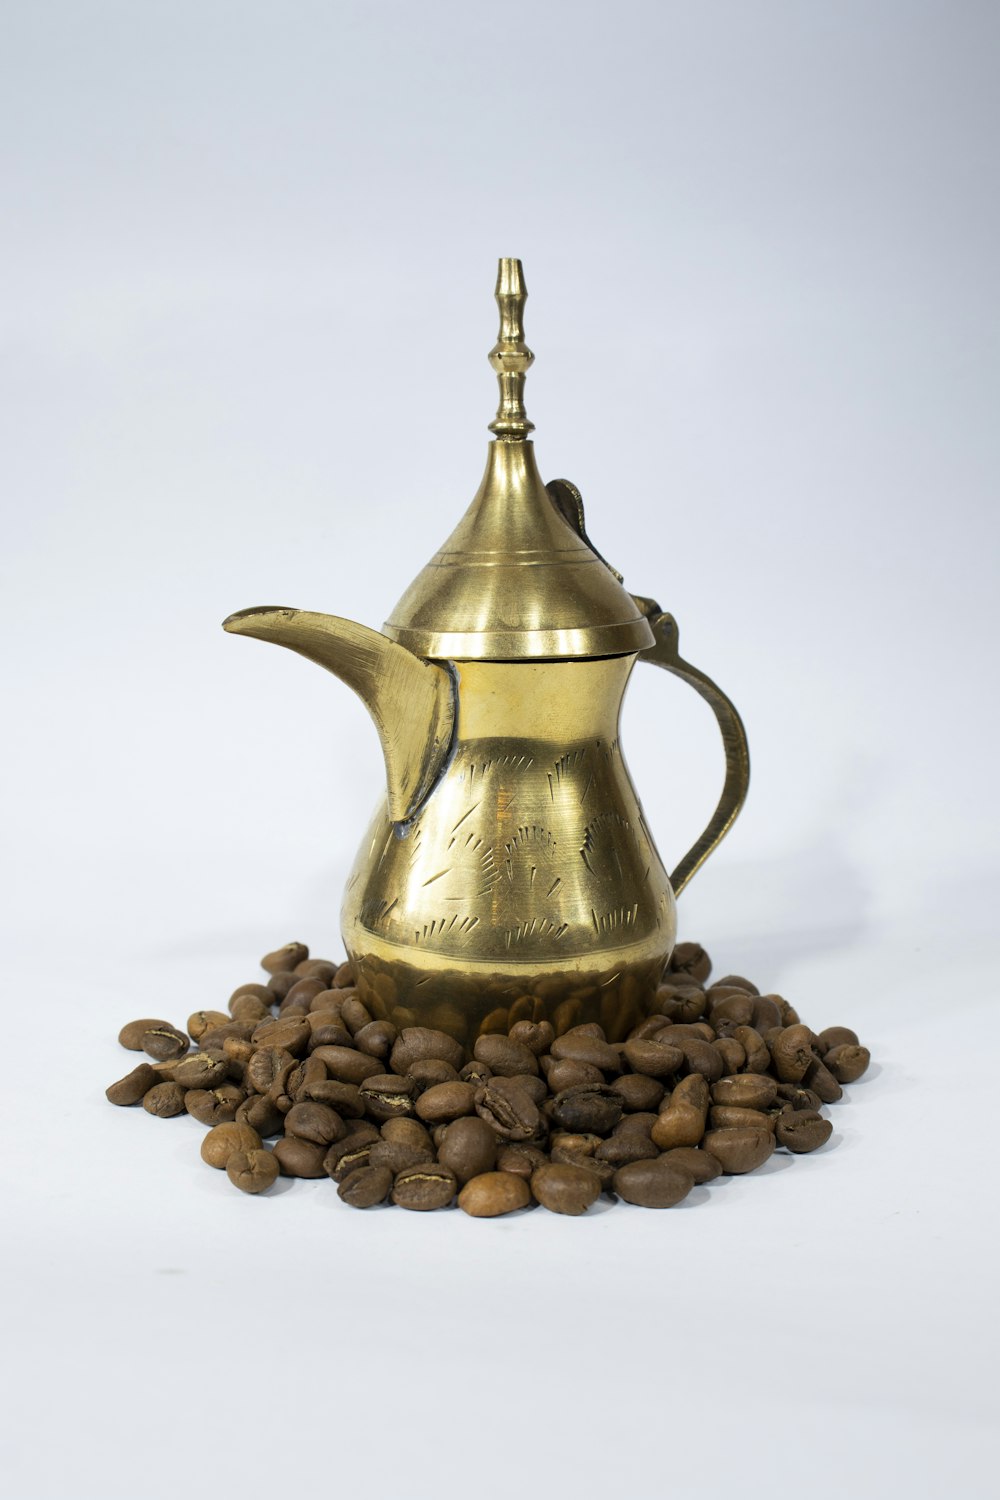 gold and silver teapot on brown coffee beans